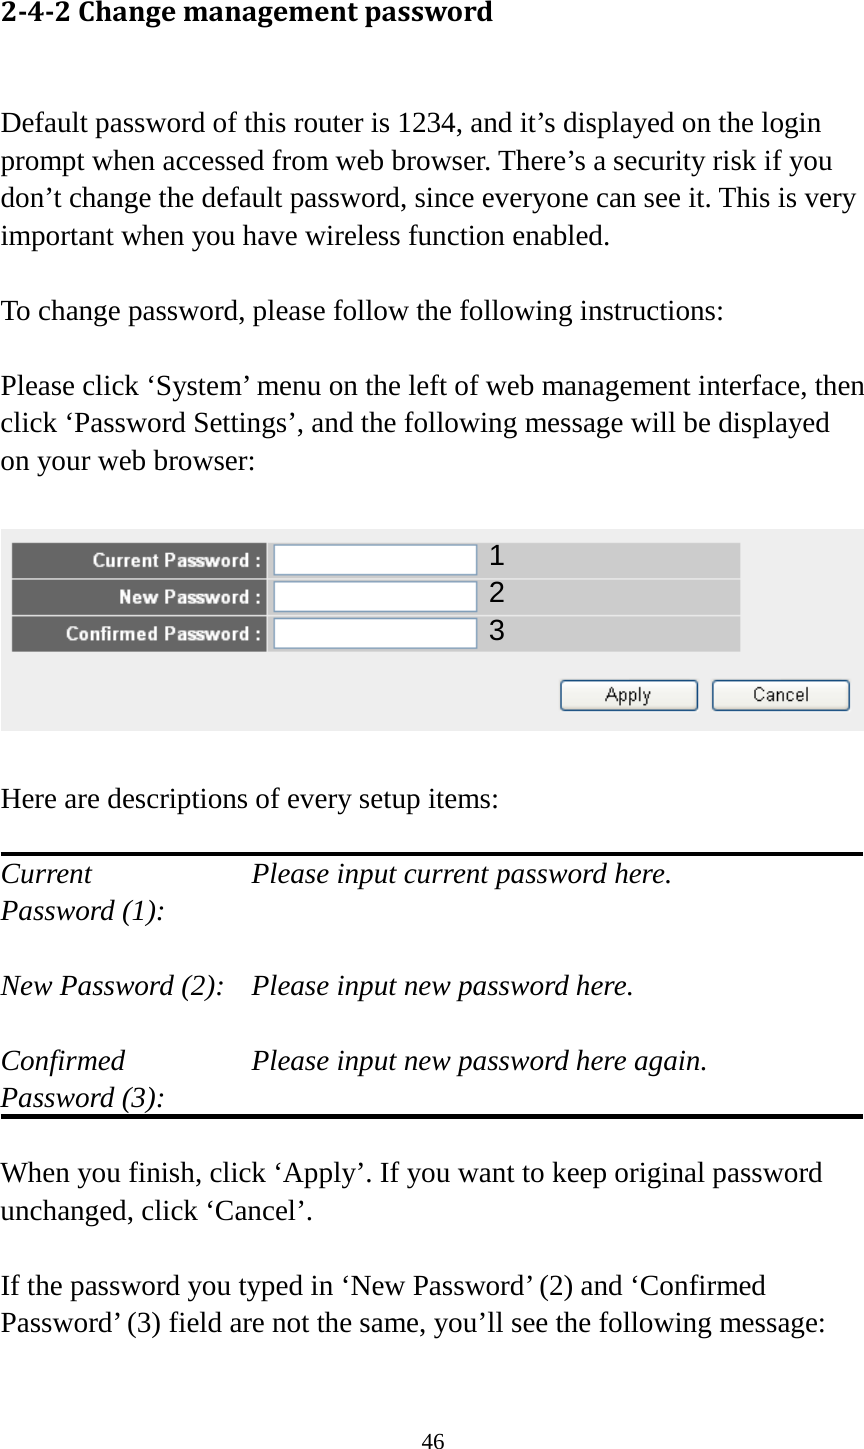 46 2-4-2 Change management password  Default password of this router is 1234, and it’s displayed on the login prompt when accessed from web browser. There’s a security risk if you don’t change the default password, since everyone can see it. This is very important when you have wireless function enabled.  To change password, please follow the following instructions:  Please click ‘System’ menu on the left of web management interface, then click ‘Password Settings’, and the following message will be displayed on your web browser:    Here are descriptions of every setup items:  Current        Please input current password here. Password (1):    New Password (2):   Please input new password here.  Confirmed       Please input new password here again. Password (3):    When you finish, click ‘Apply’. If you want to keep original password unchanged, click ‘Cancel’.  If the password you typed in ‘New Password’ (2) and ‘Confirmed Password’ (3) field are not the same, you’ll see the following message:  1 2 3 